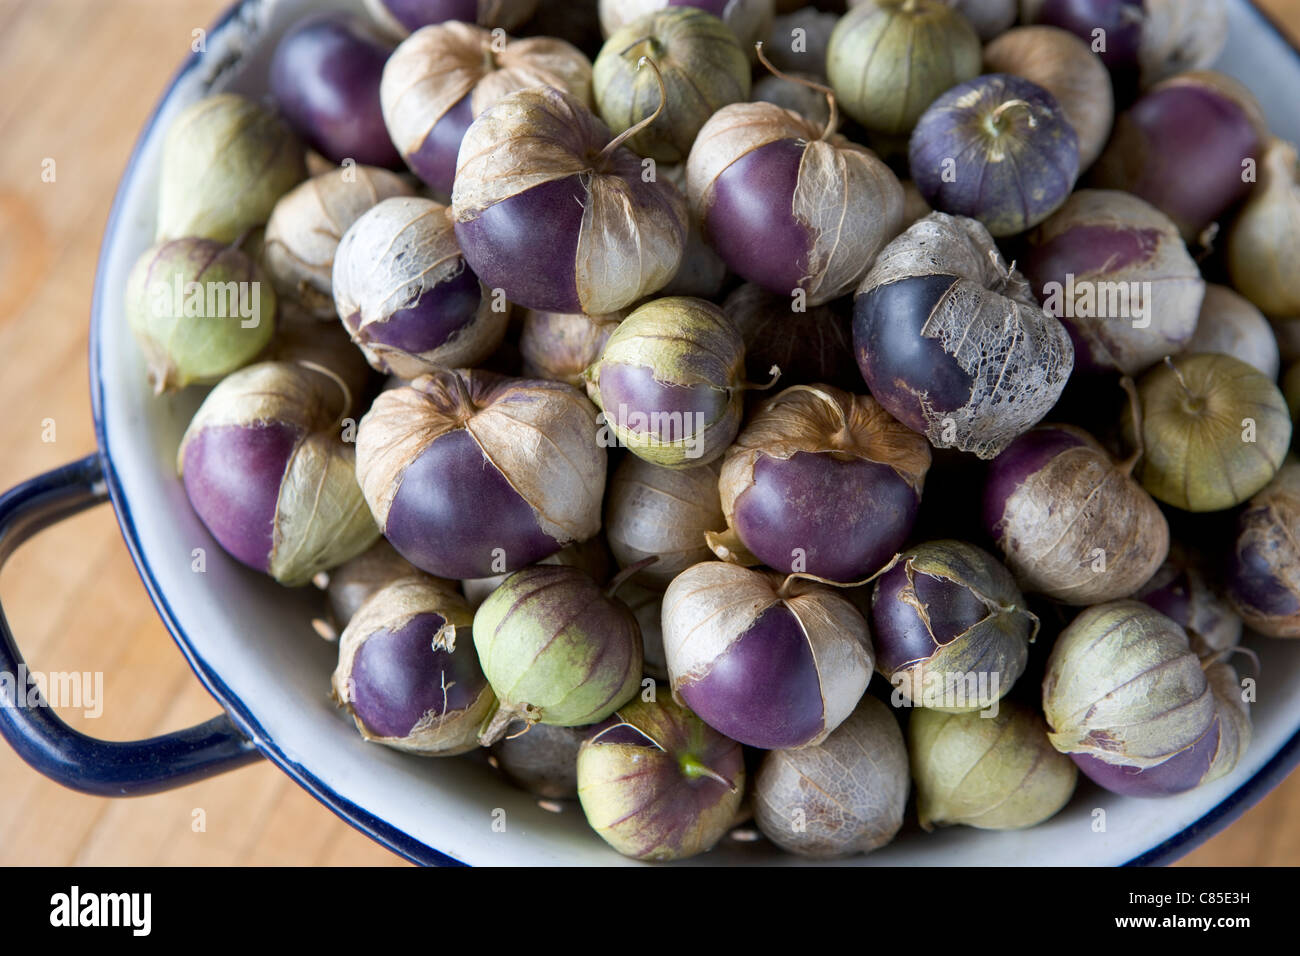 Purple Heirloom tomatillos in an old metal collander. Physalis philadelphica is a plant of the nightshade family. Stock Photo